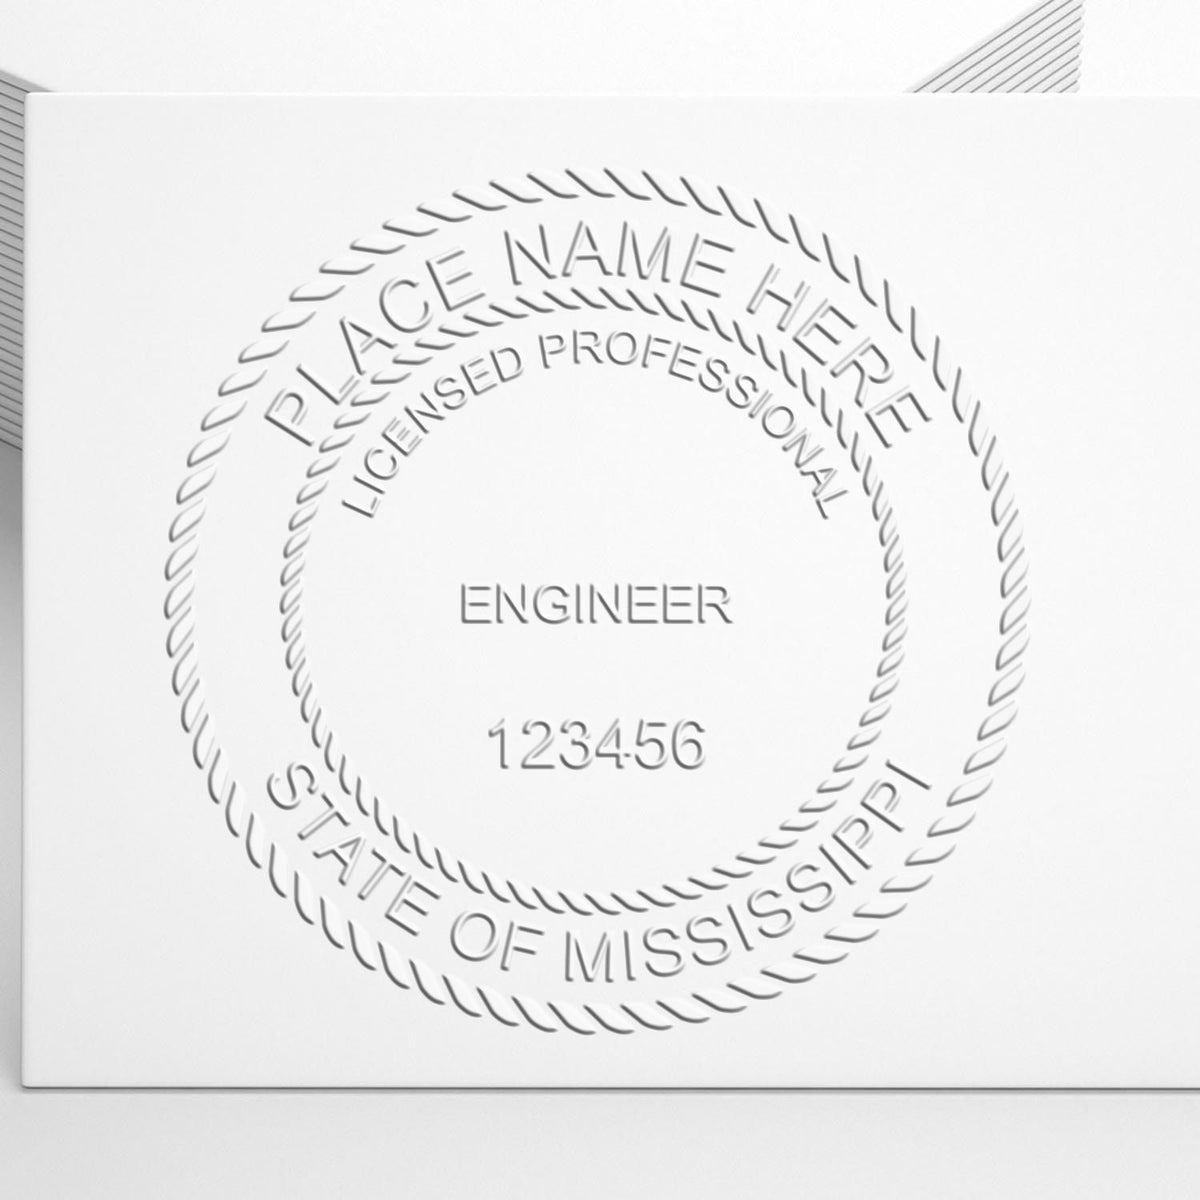 A photograph of the Soft Mississippi Professional Engineer Seal stamp impression reveals a vivid, professional image of the on paper.